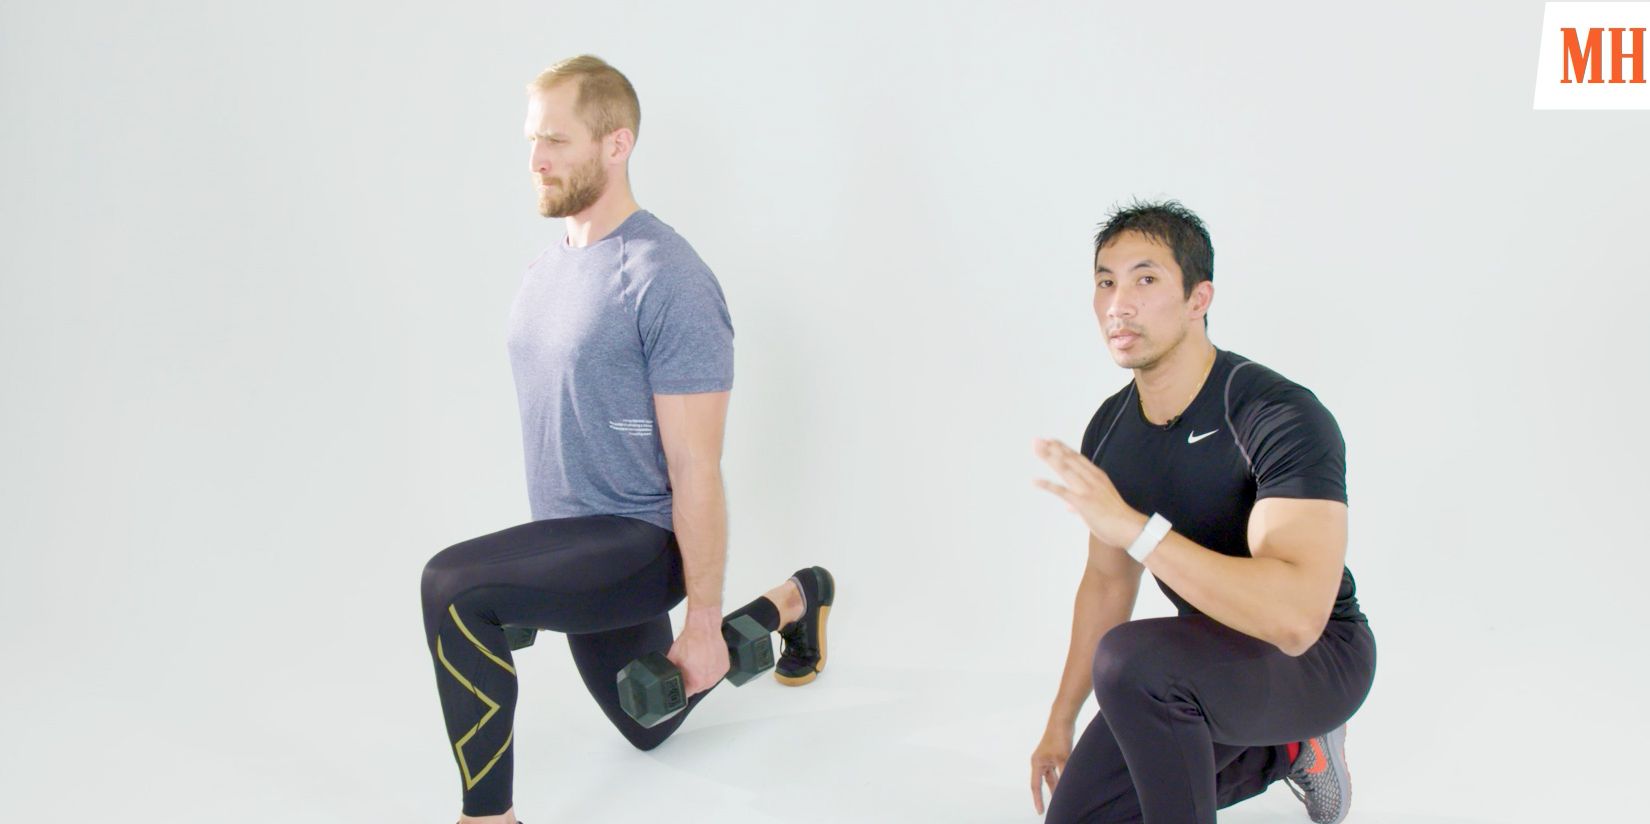 lunges exercise for men